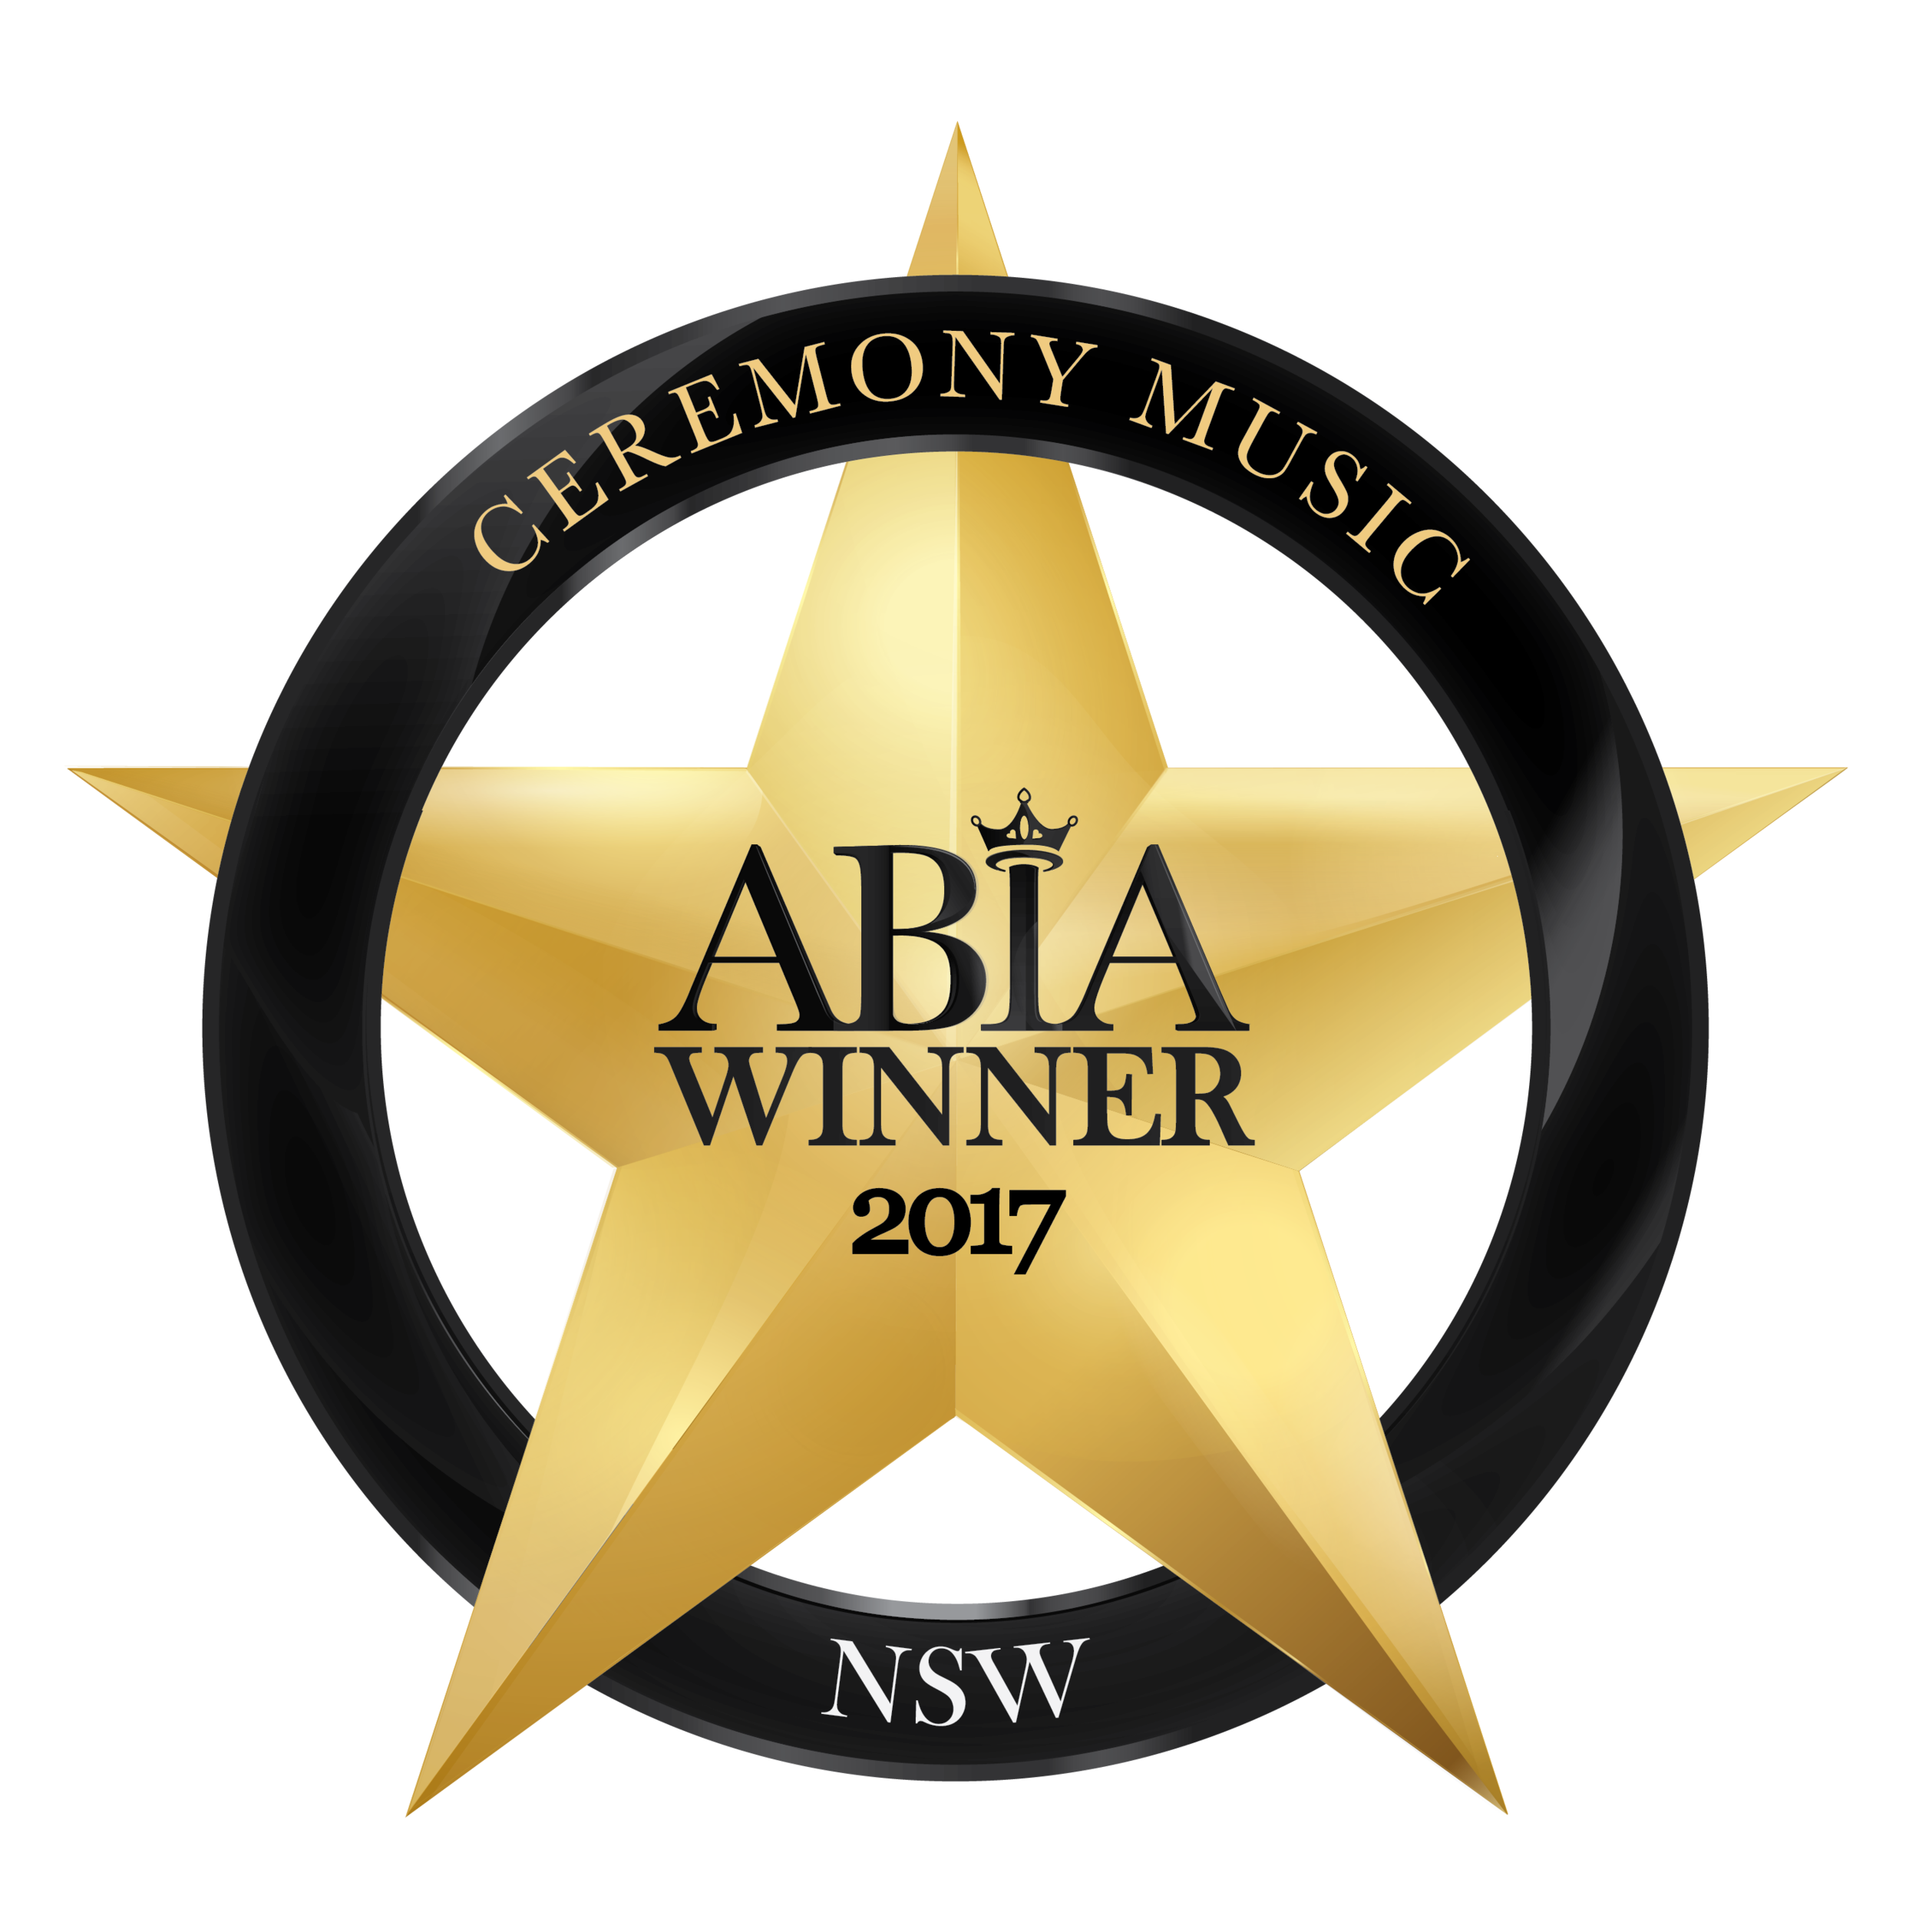 ABIA-Logo-CeremonyMusic-NSW17_WINNER.png